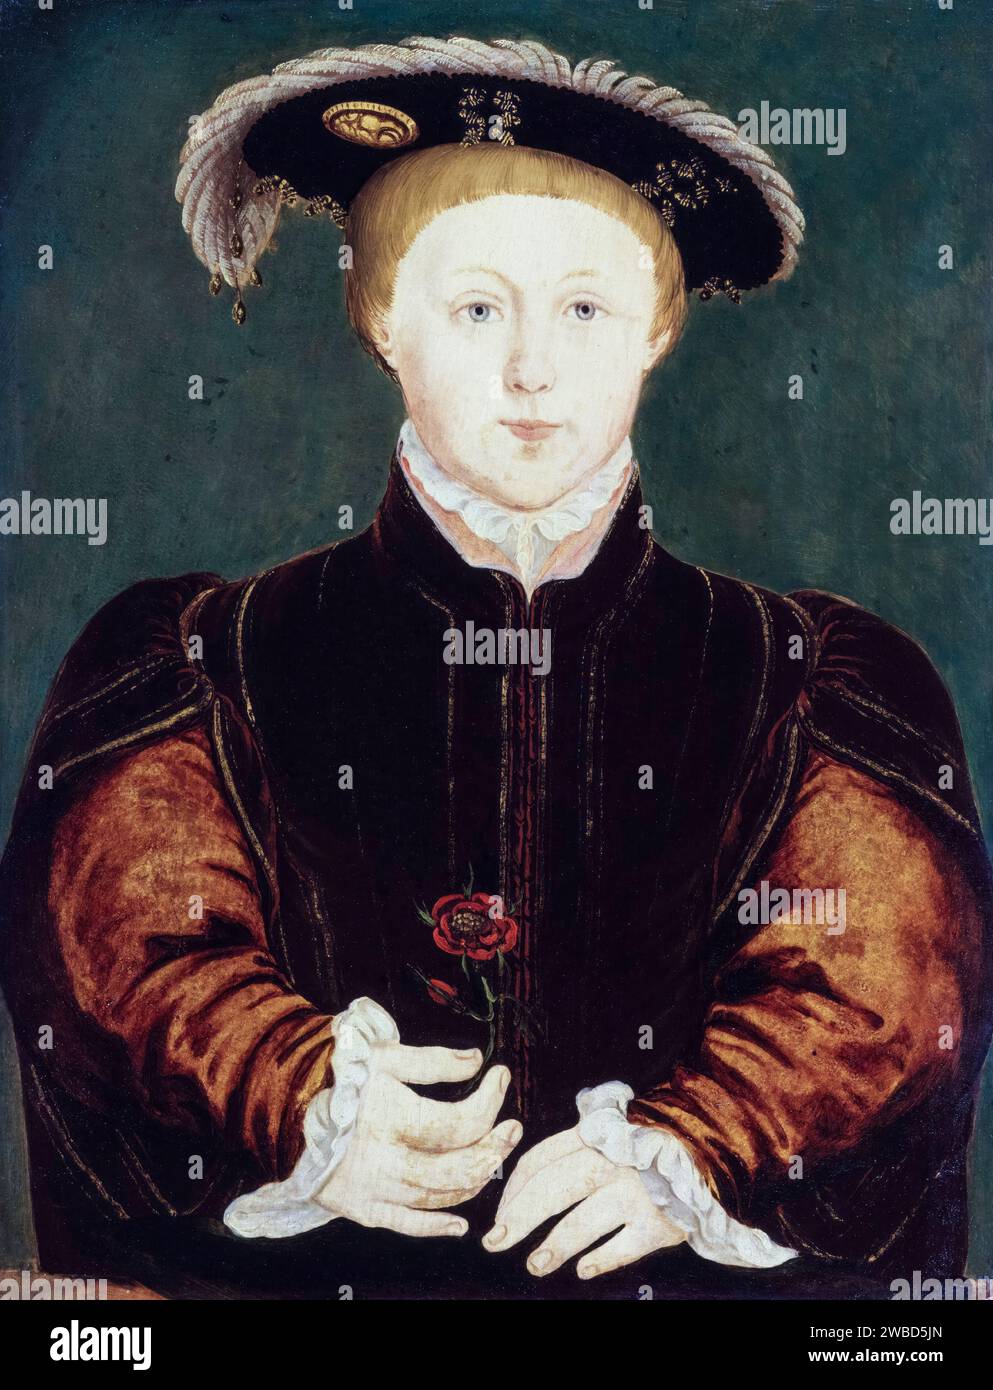 Edward VI (1537-1553) as a boy, King of England and Ireland (1547-1553) , portrait painting in oil on panel after Hans Holbein the Younger, circa 1542 Stock Photo